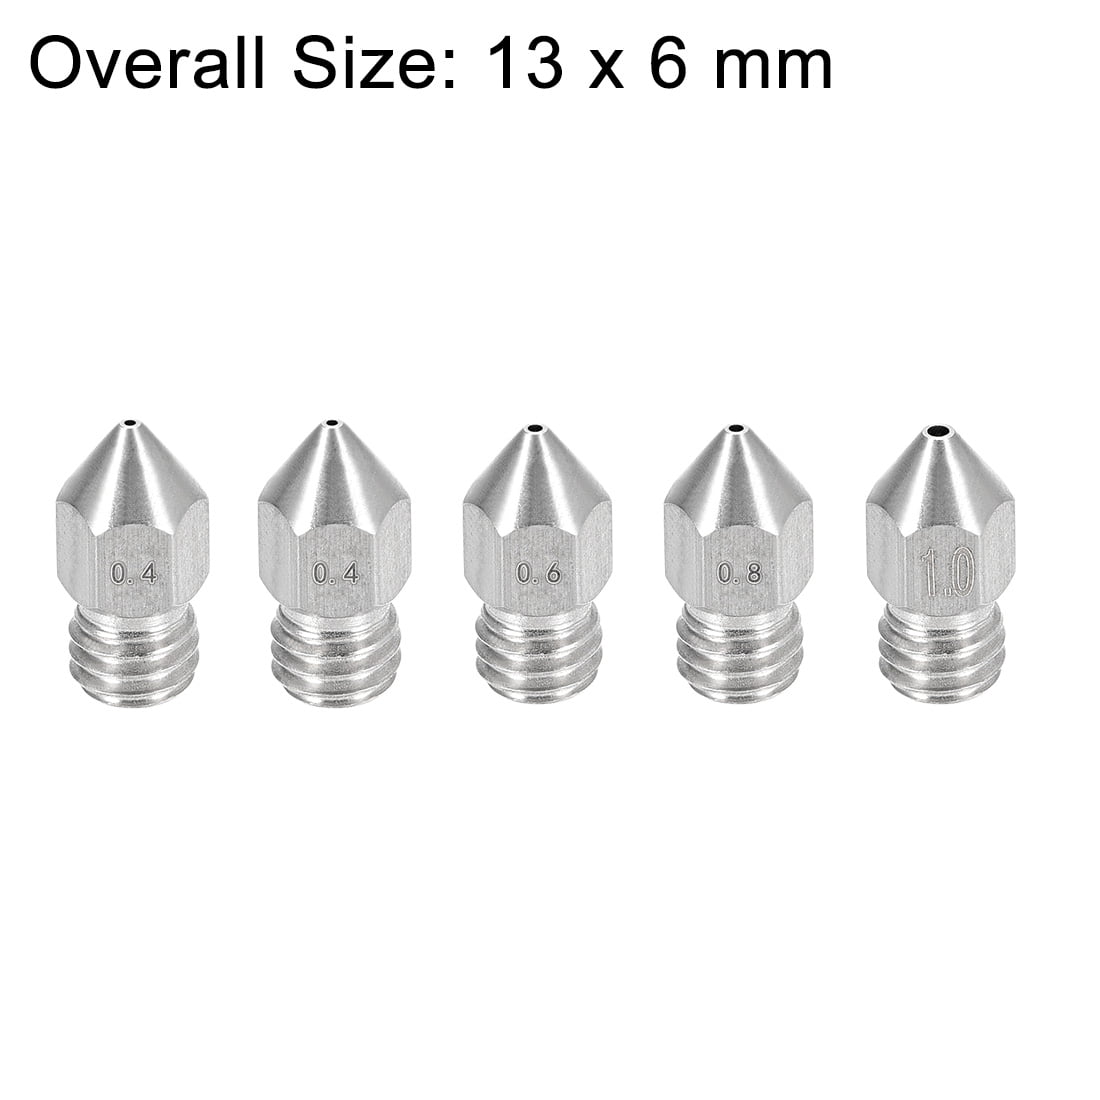 uxcell 3D Printer Nozzle,Stainless Steel MK10 Nozzle 0.2mm,Extruder Print Head for 1.75mm Filament M7 3D Printer 